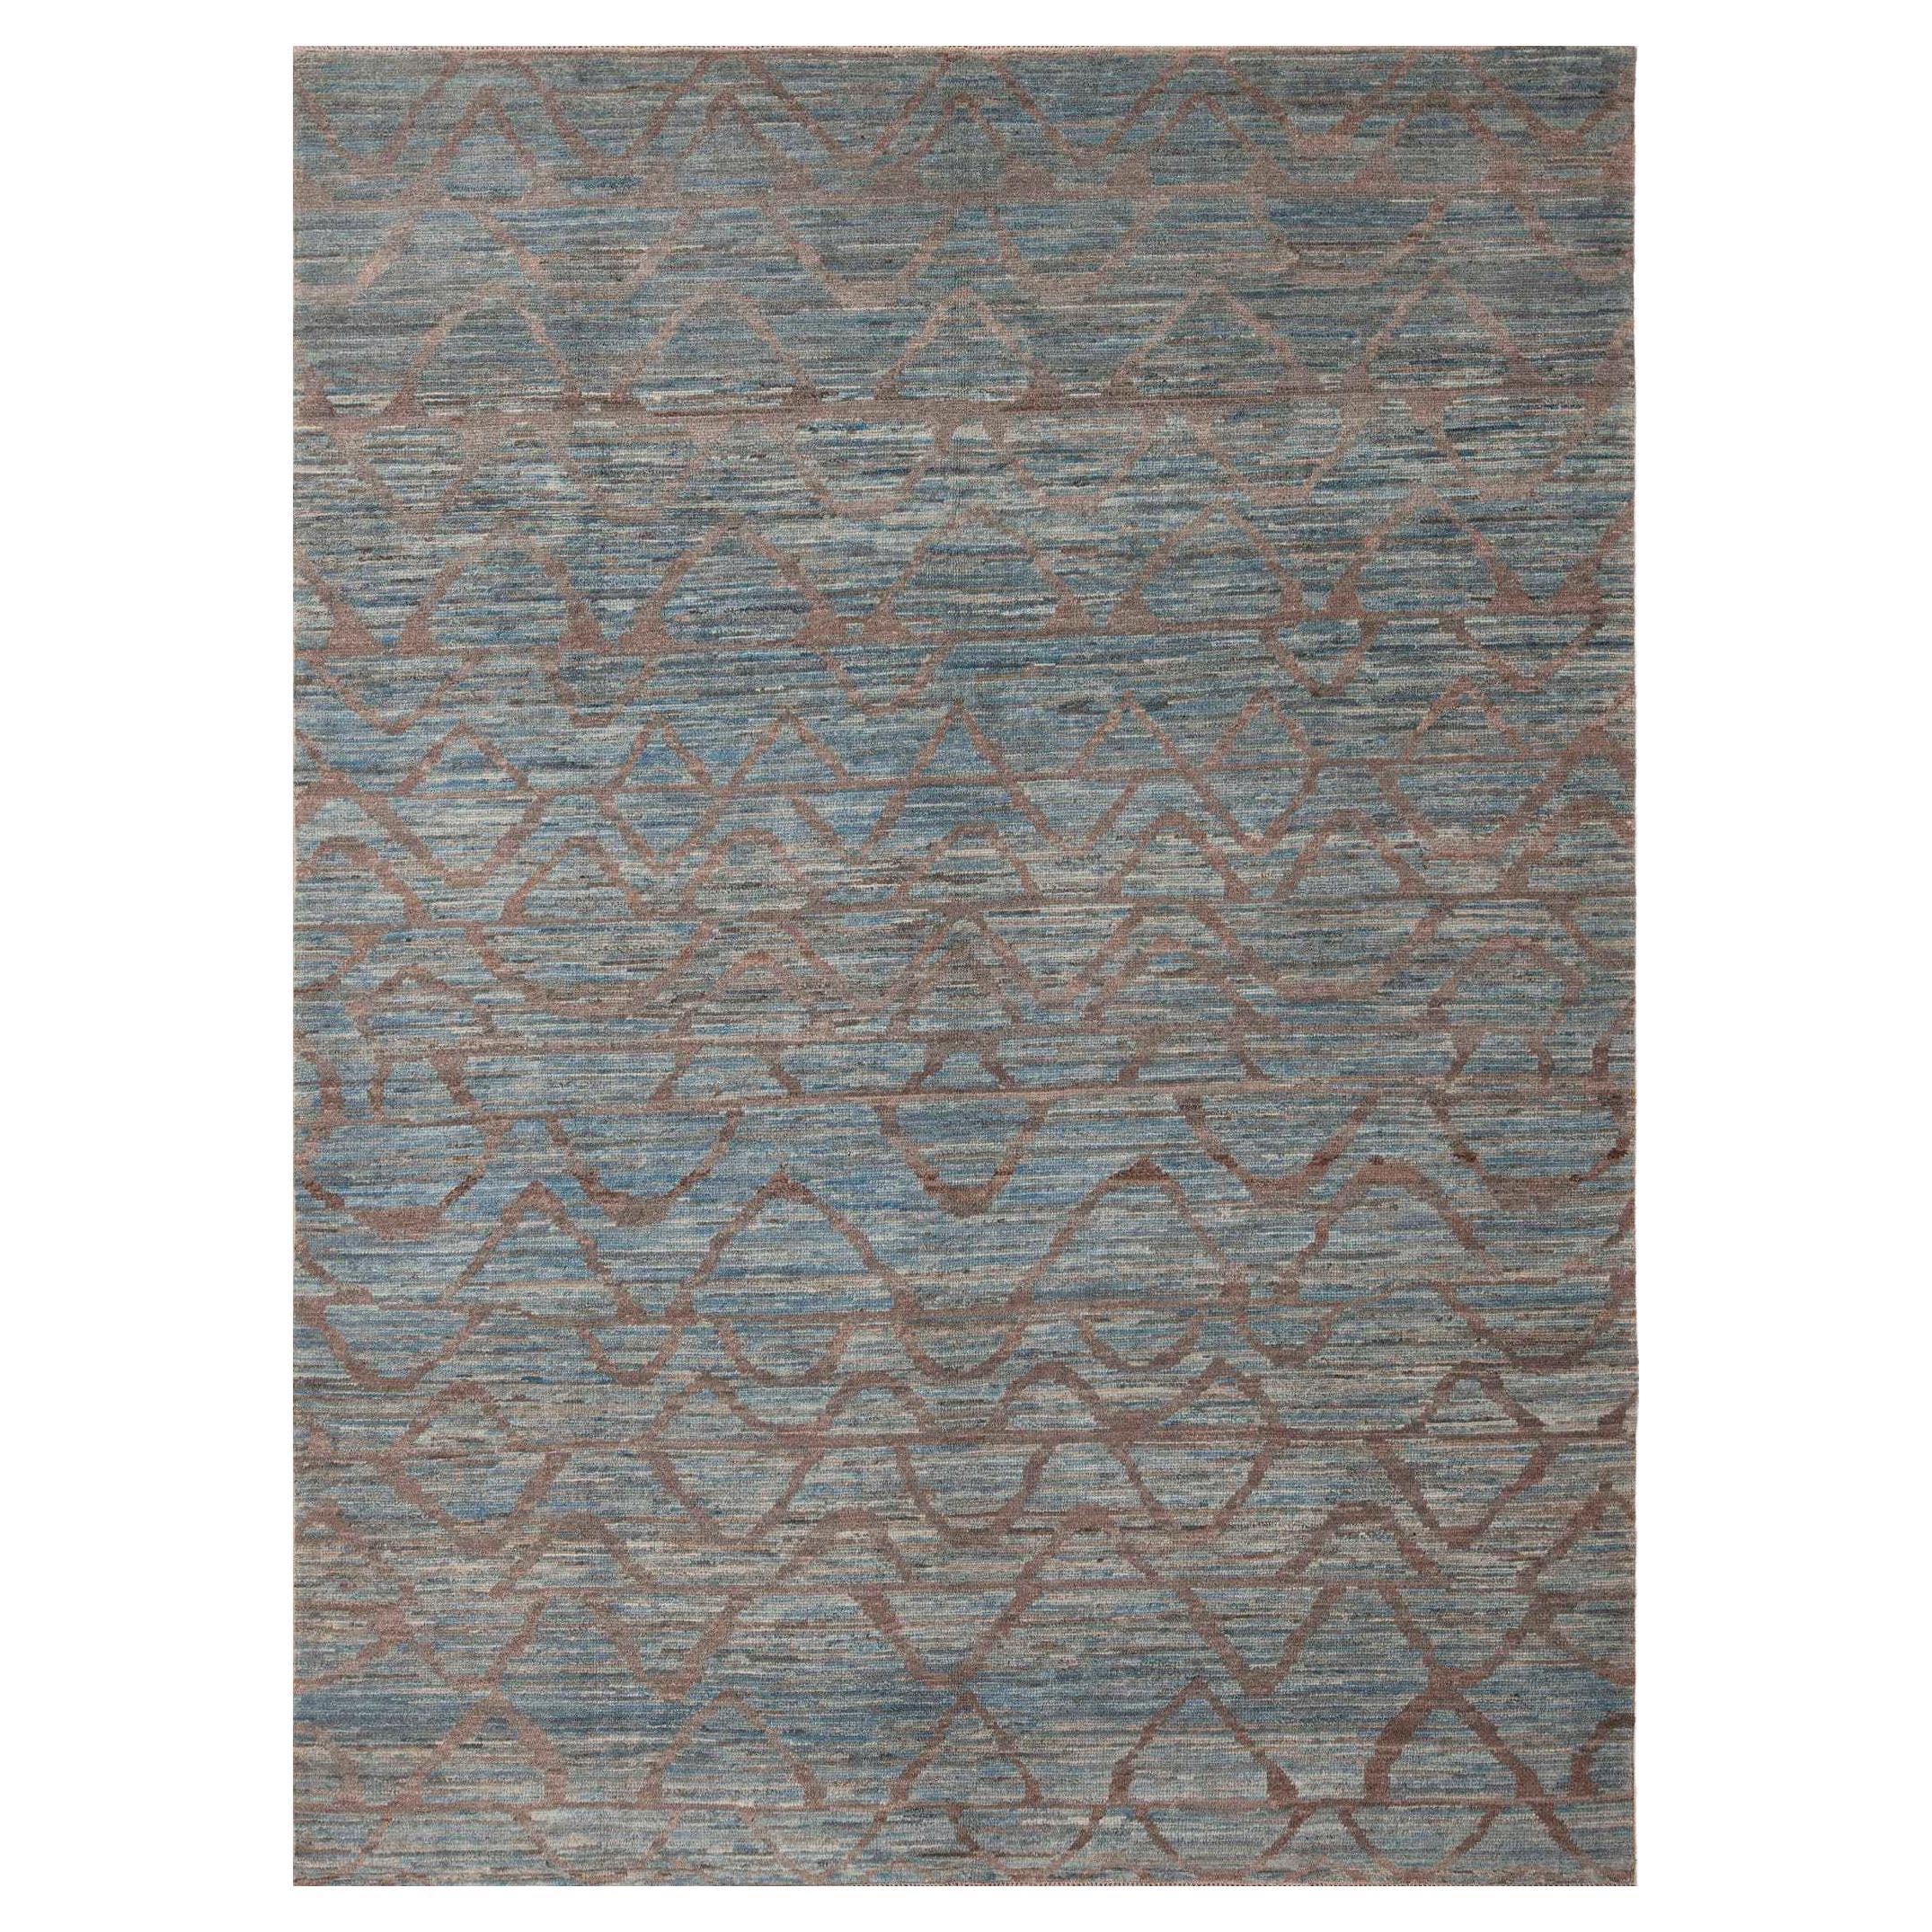 Nazmiyal Collection Blue And Brown Abstract Wavy Design Modern Rug 6'11" x 9'8"